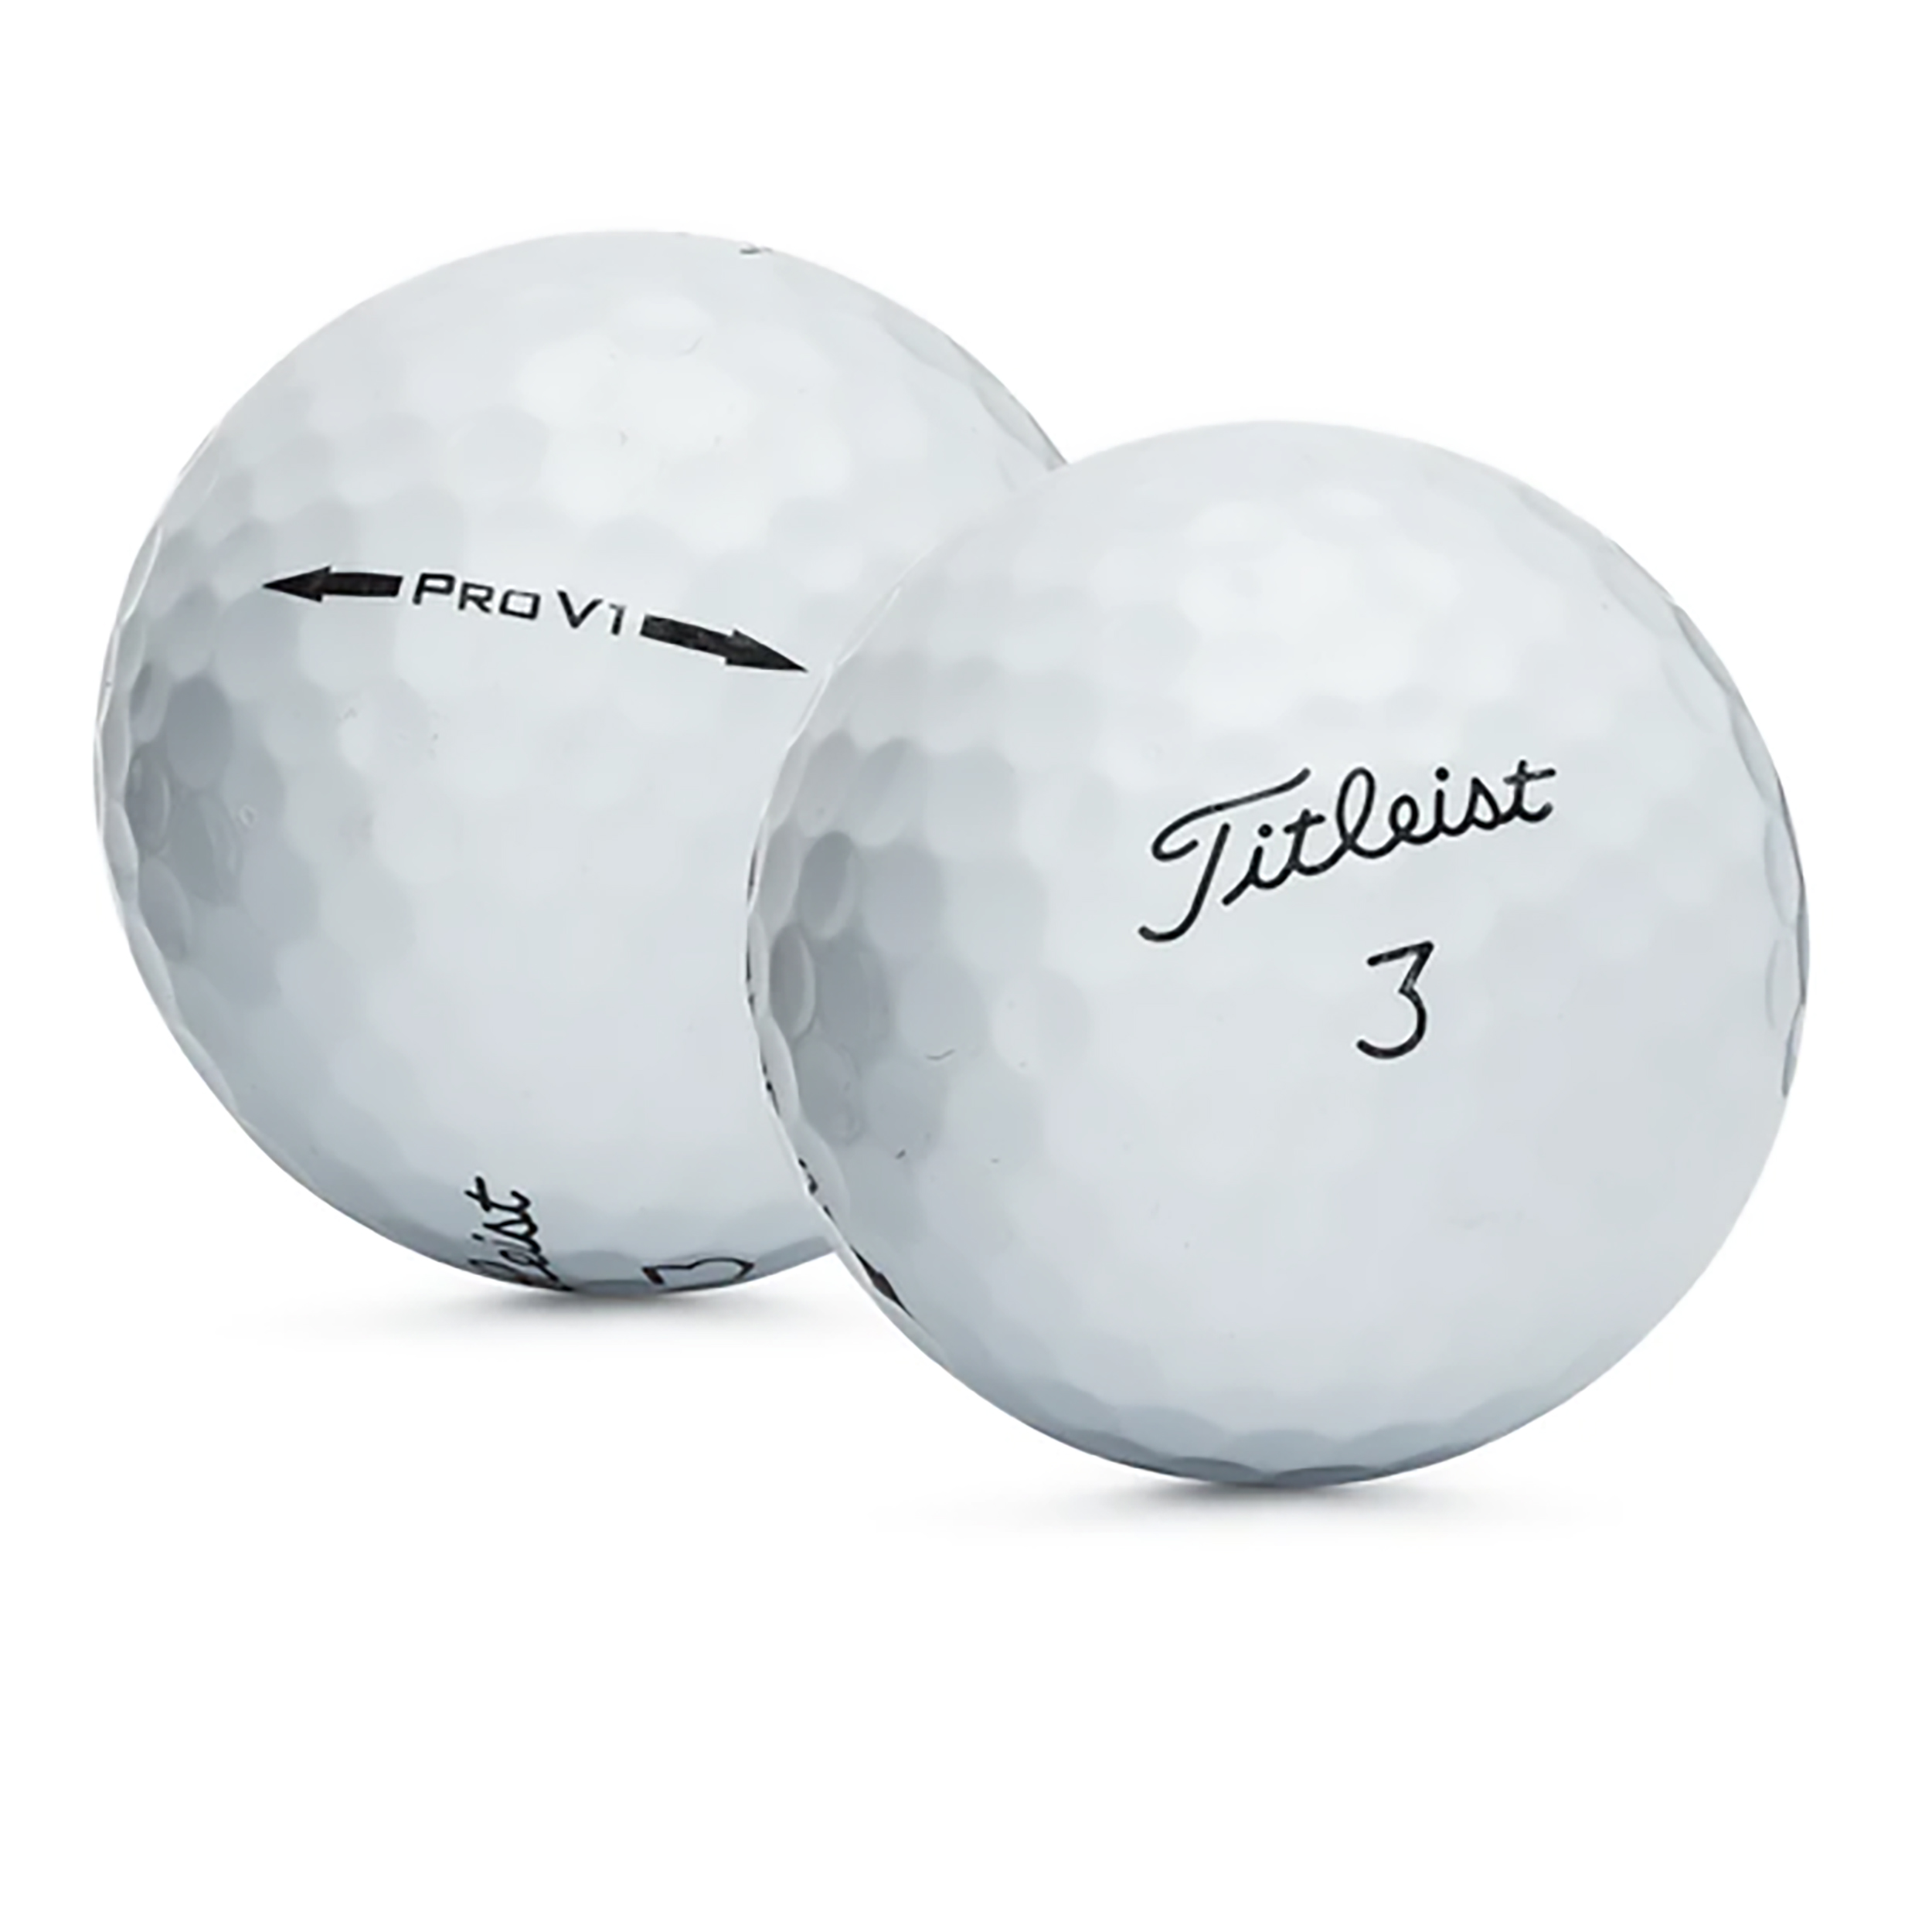 Titleist Pro V1, Golf Balls, Mint, 5a, AAAAA Quality, 50 Pack, White - image 1 of 10